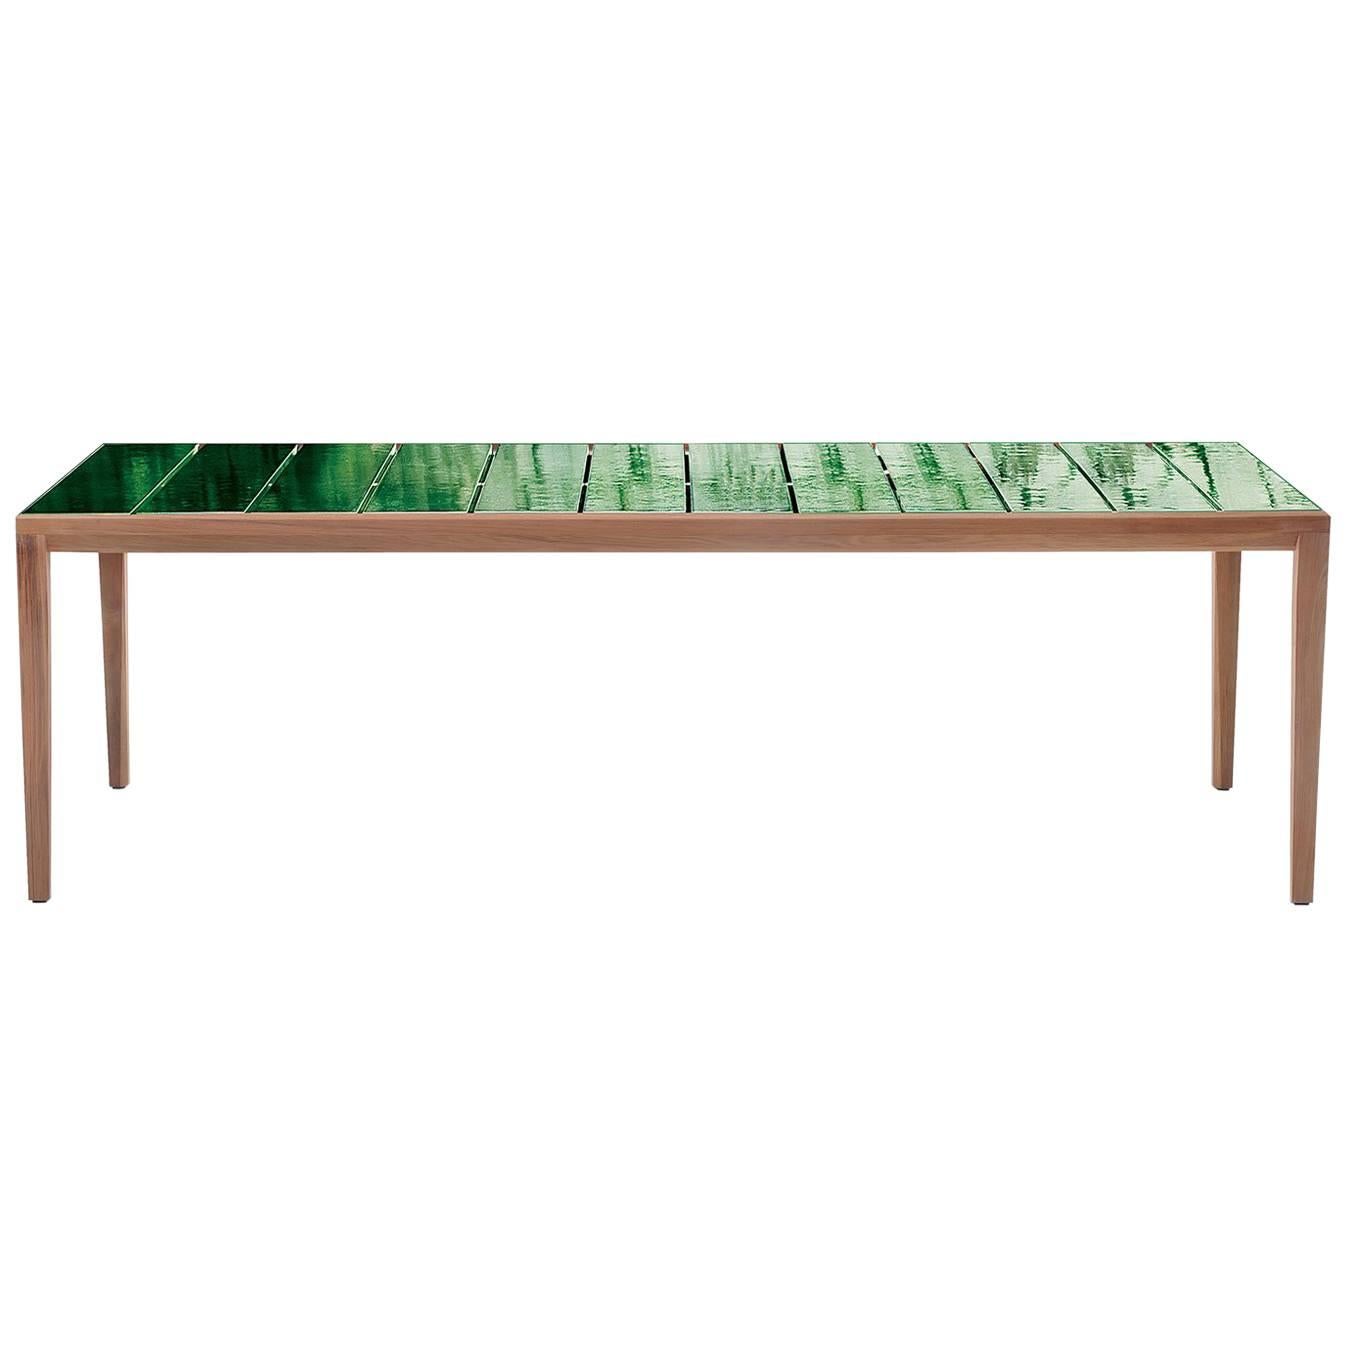 Roda Teka Outdoor 174 Dining Table in Teak with Glazed Stoneware Top For Sale